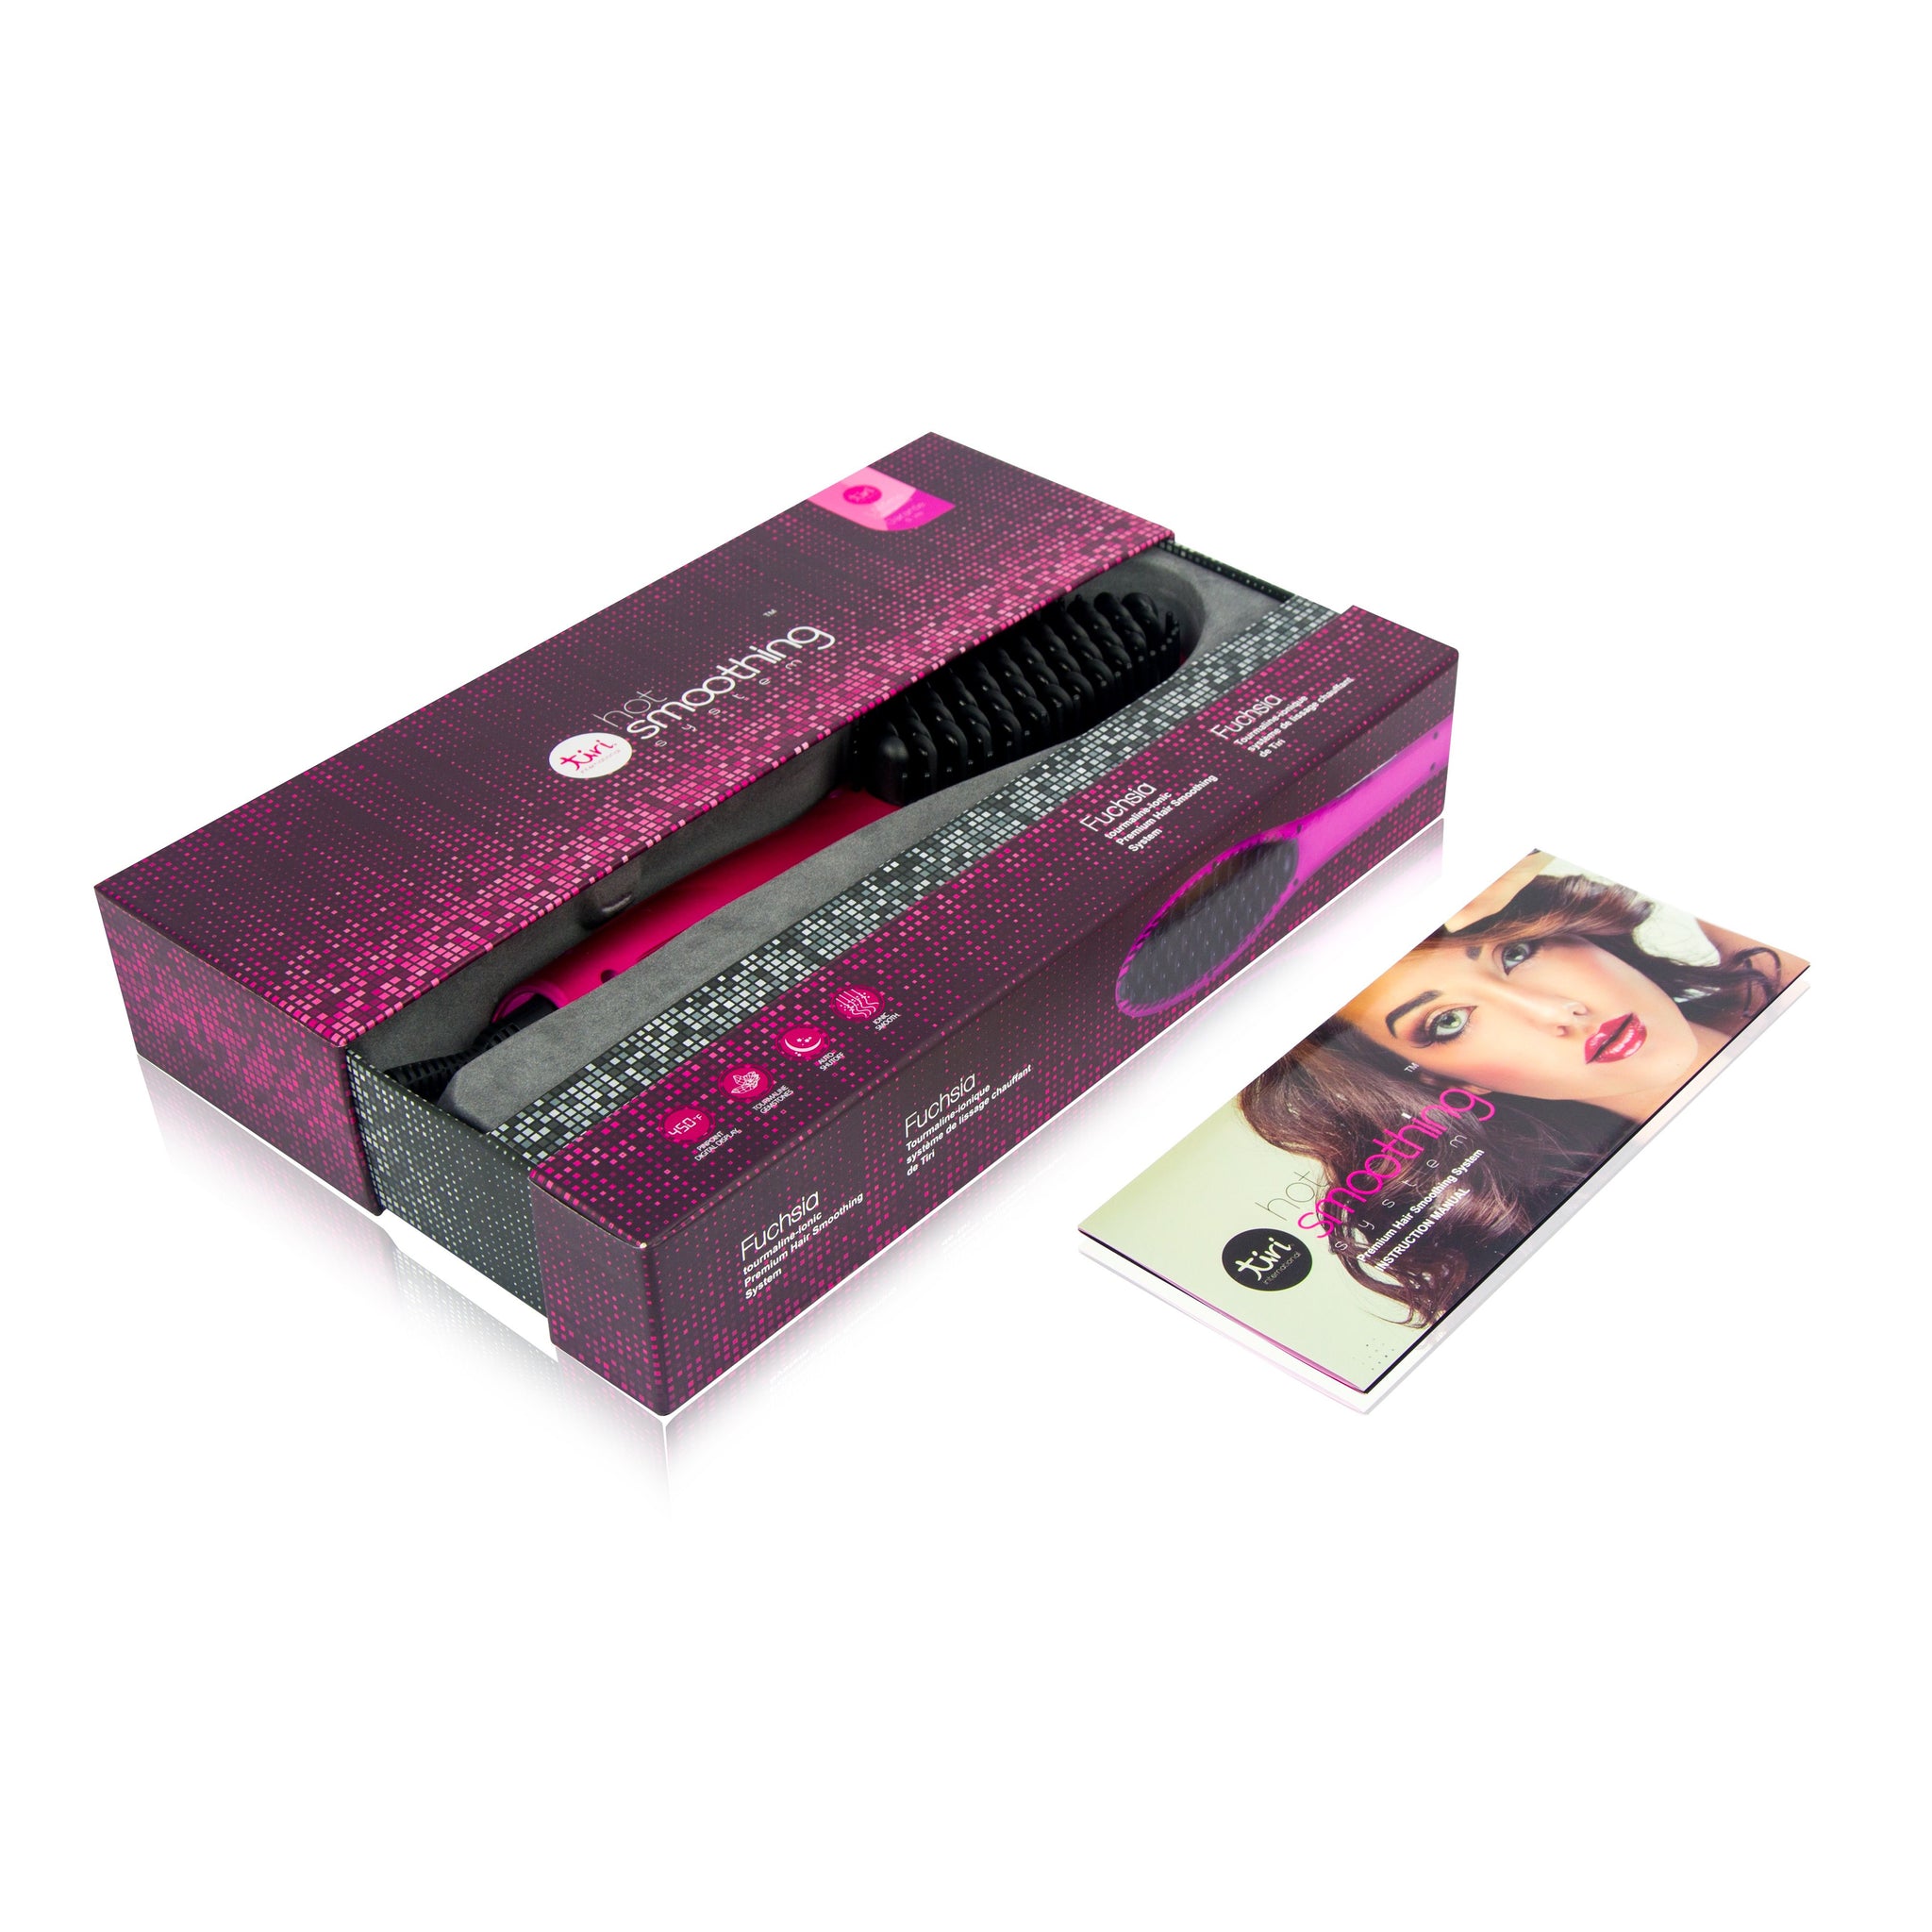 Digital Hot Brush Smoothing System with Far Infrared Tech - Fuschia